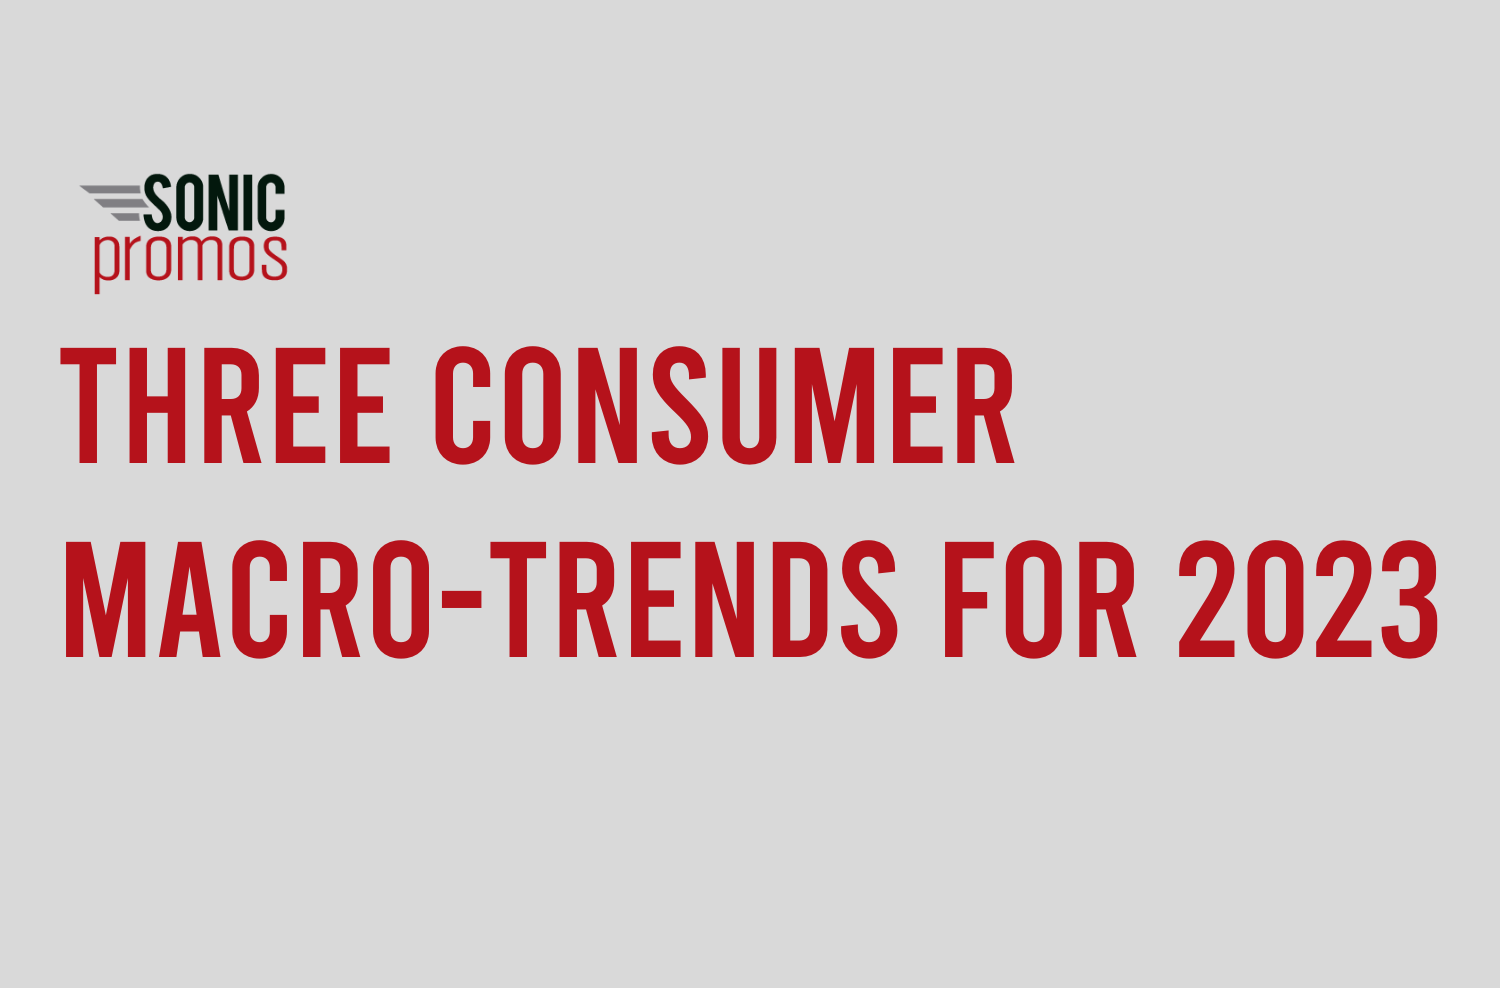 Need to prepare for 2023? Three consumer macro-trends we’re watching